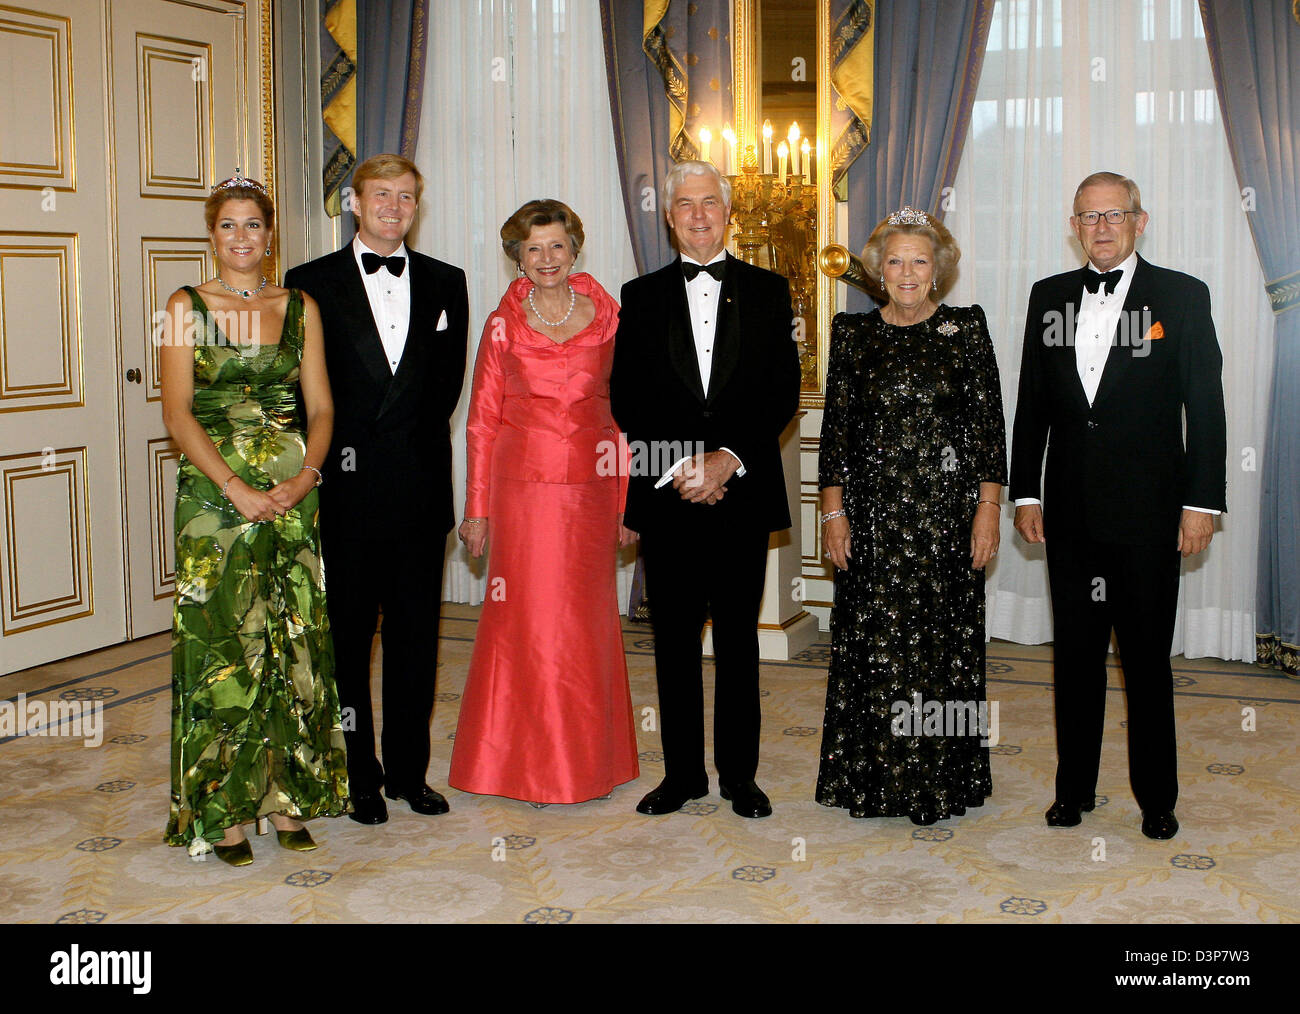 L-R: Princess Maxima, Crown Prince Willem-Alexander, Michael Jeffery and wife Marlena, Queen Beatrix of the Netherlands and Pieter van Vollenhoven are pictured during a reception for Australia's General Governor Jeffrey and his wife in The Hague, Netherlands, Tuesday, 26 September 2006. Photo RoyalPress (ATTENTION: Netherlands out!) Stock Photo